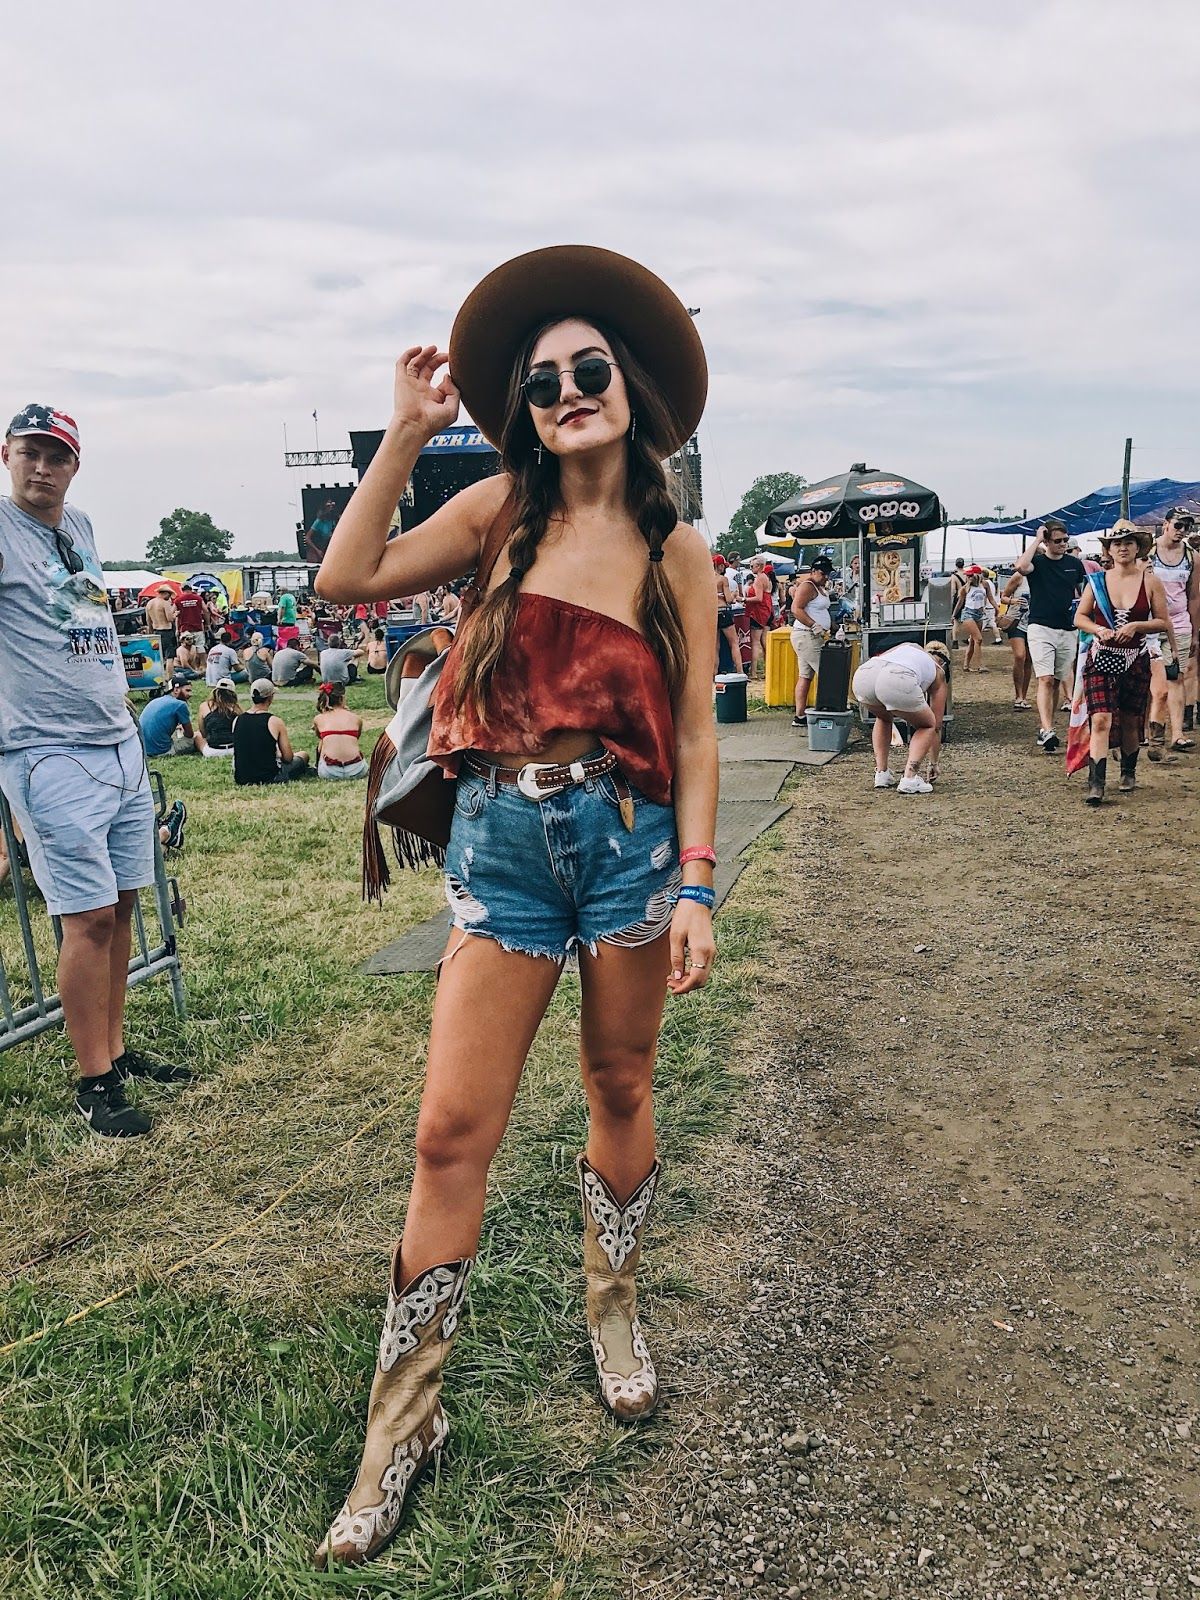 concert outfit ideas for women